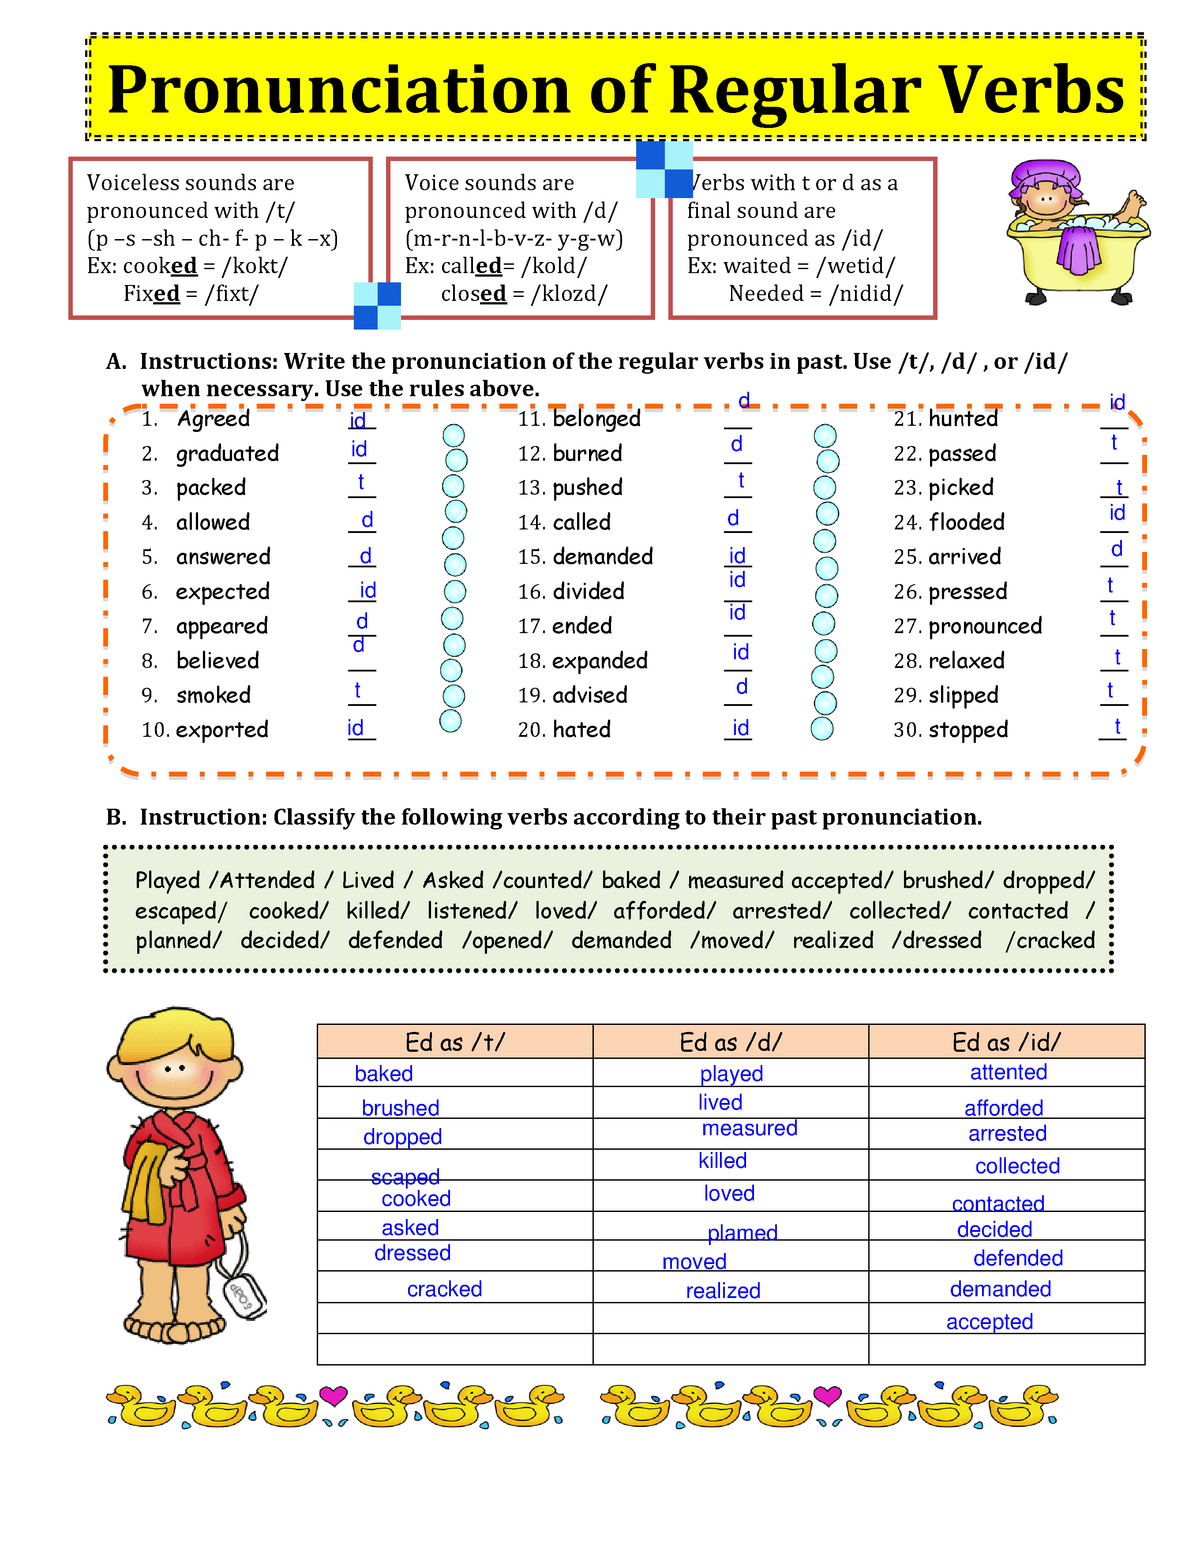 Pronunciation Of Regular Verbs In The Simple Past A Instructions 